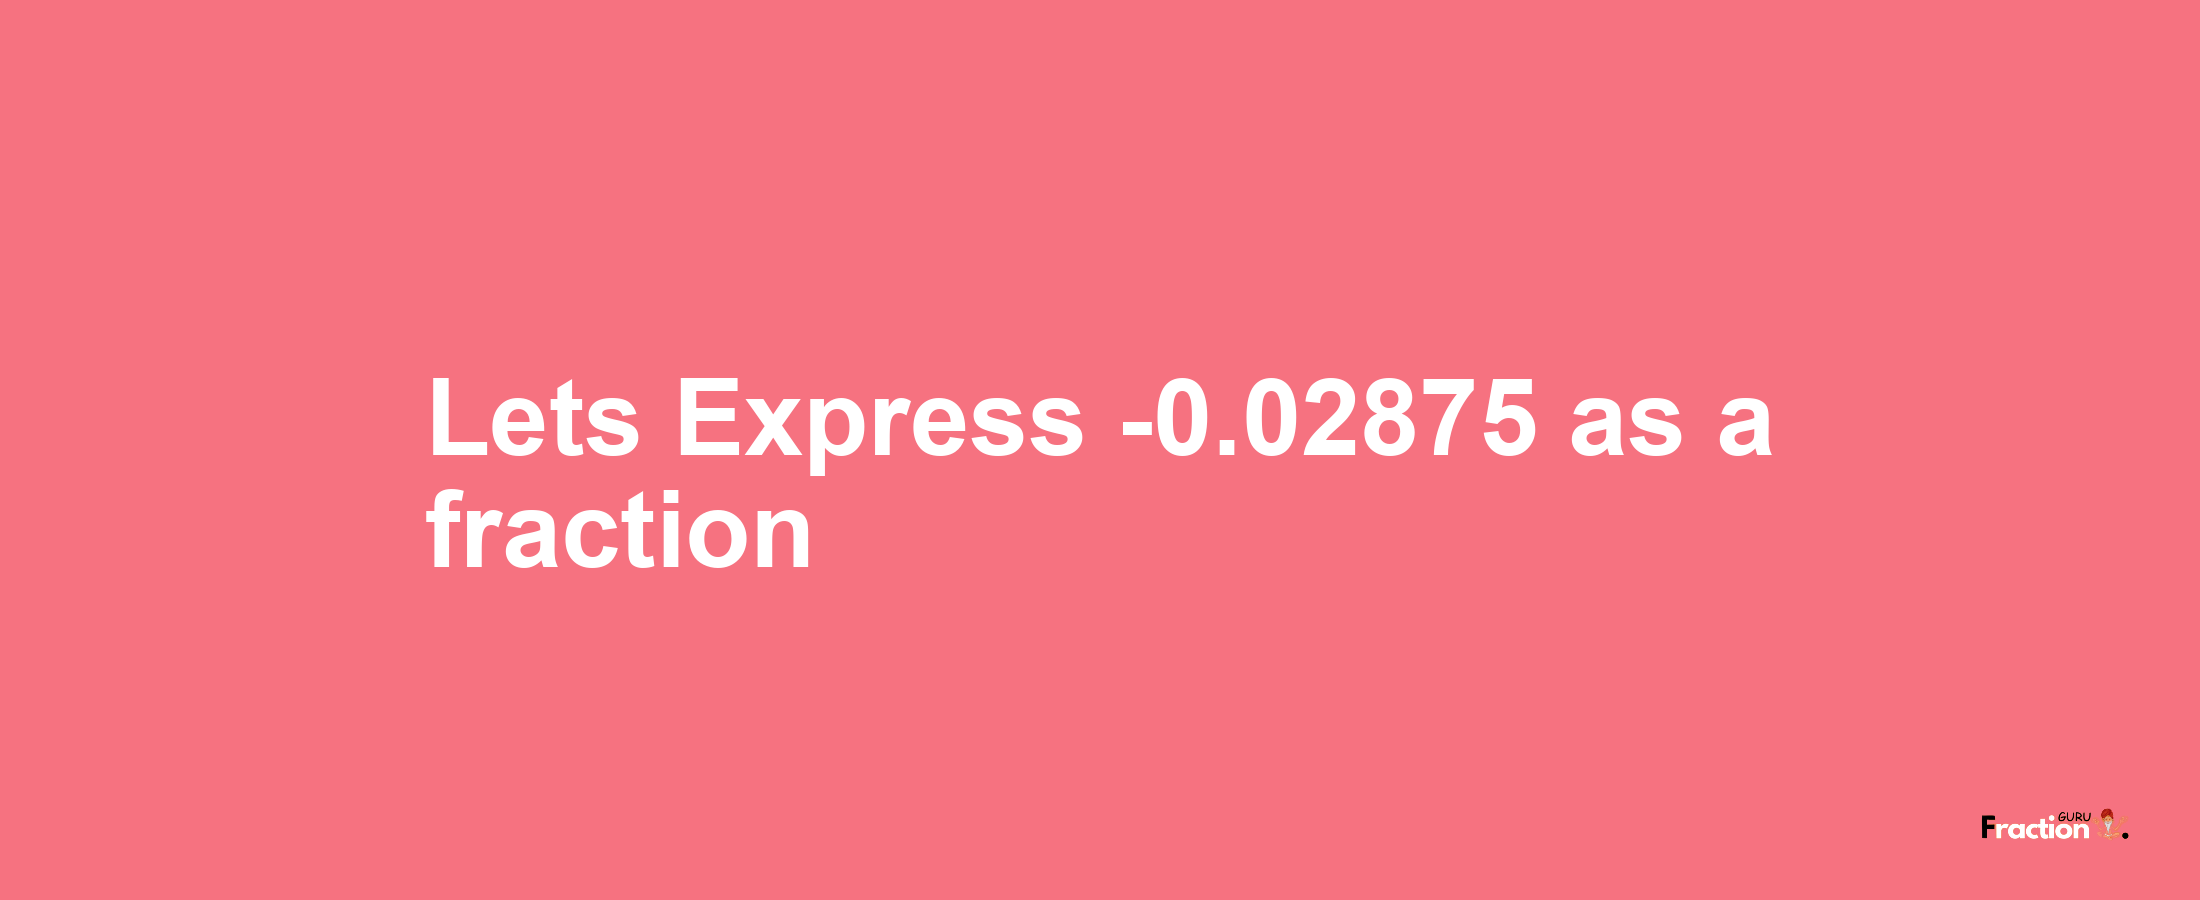 Lets Express -0.02875 as afraction